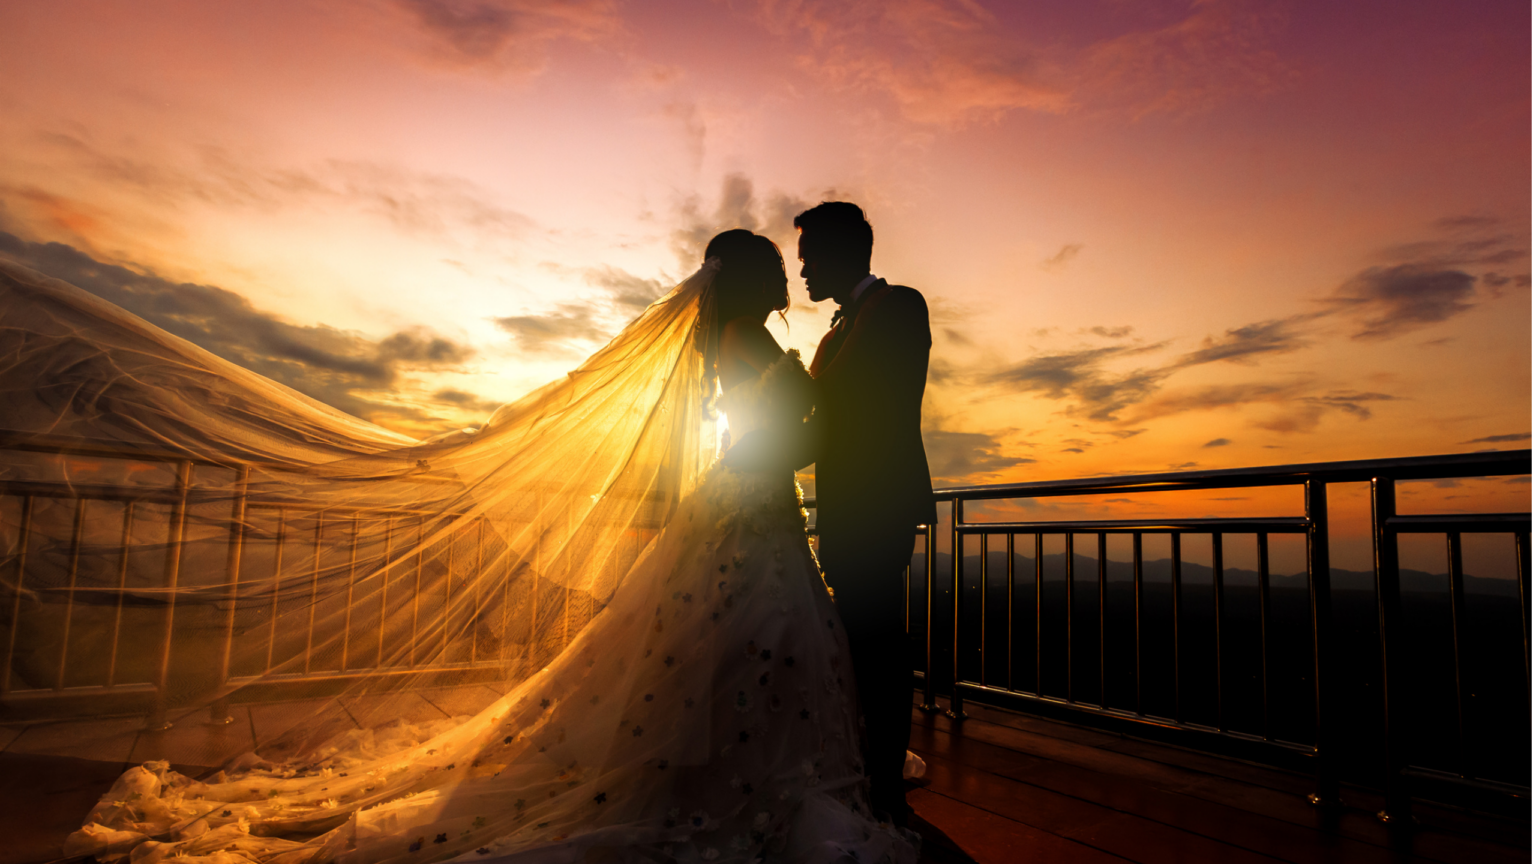 Wedding couple sharing a private moment outdoors at sunset